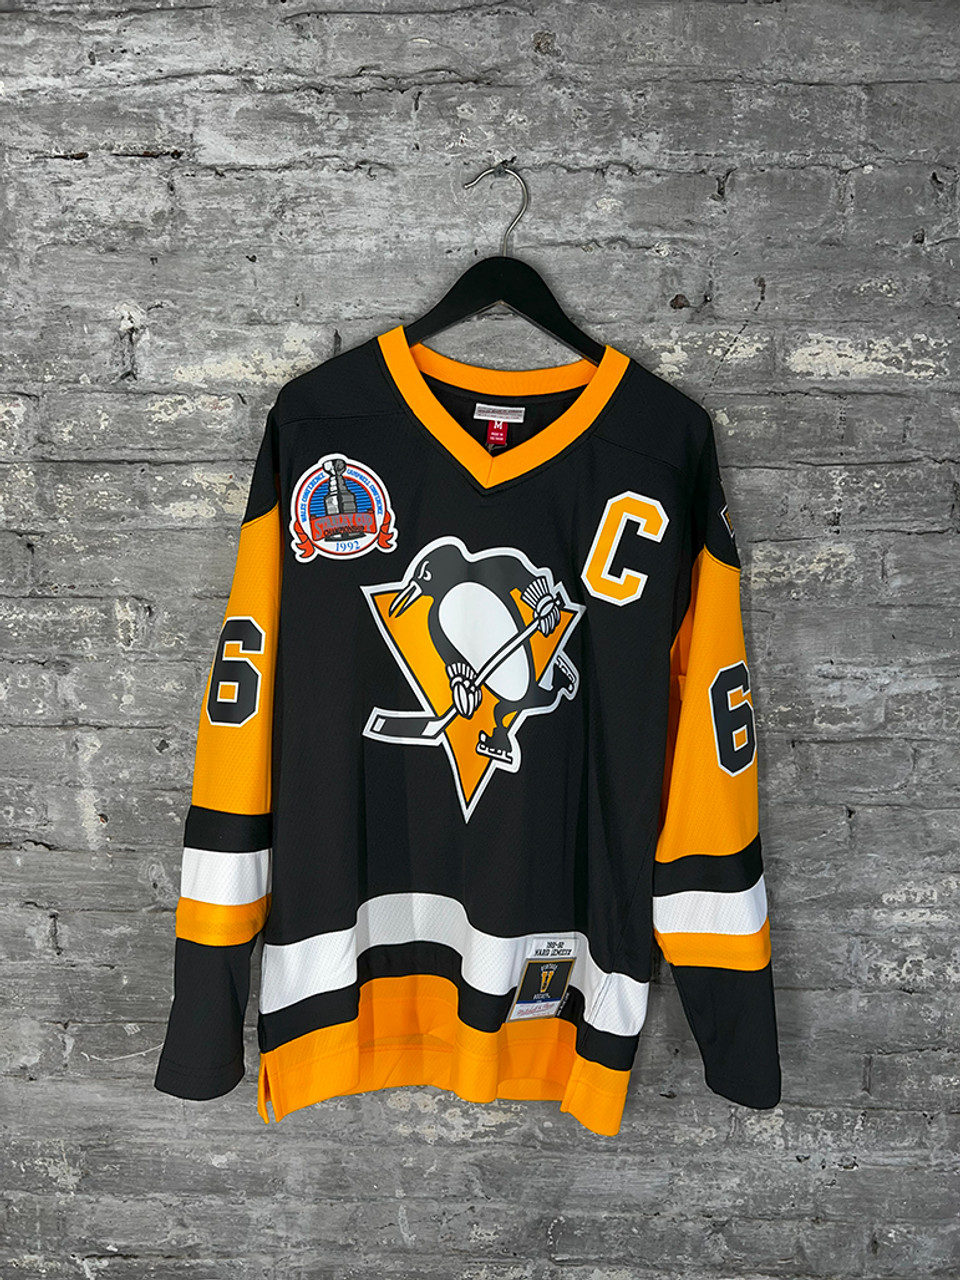 #58 Letang - Adidas NHL Embroidered Penguins Jersey with Strap